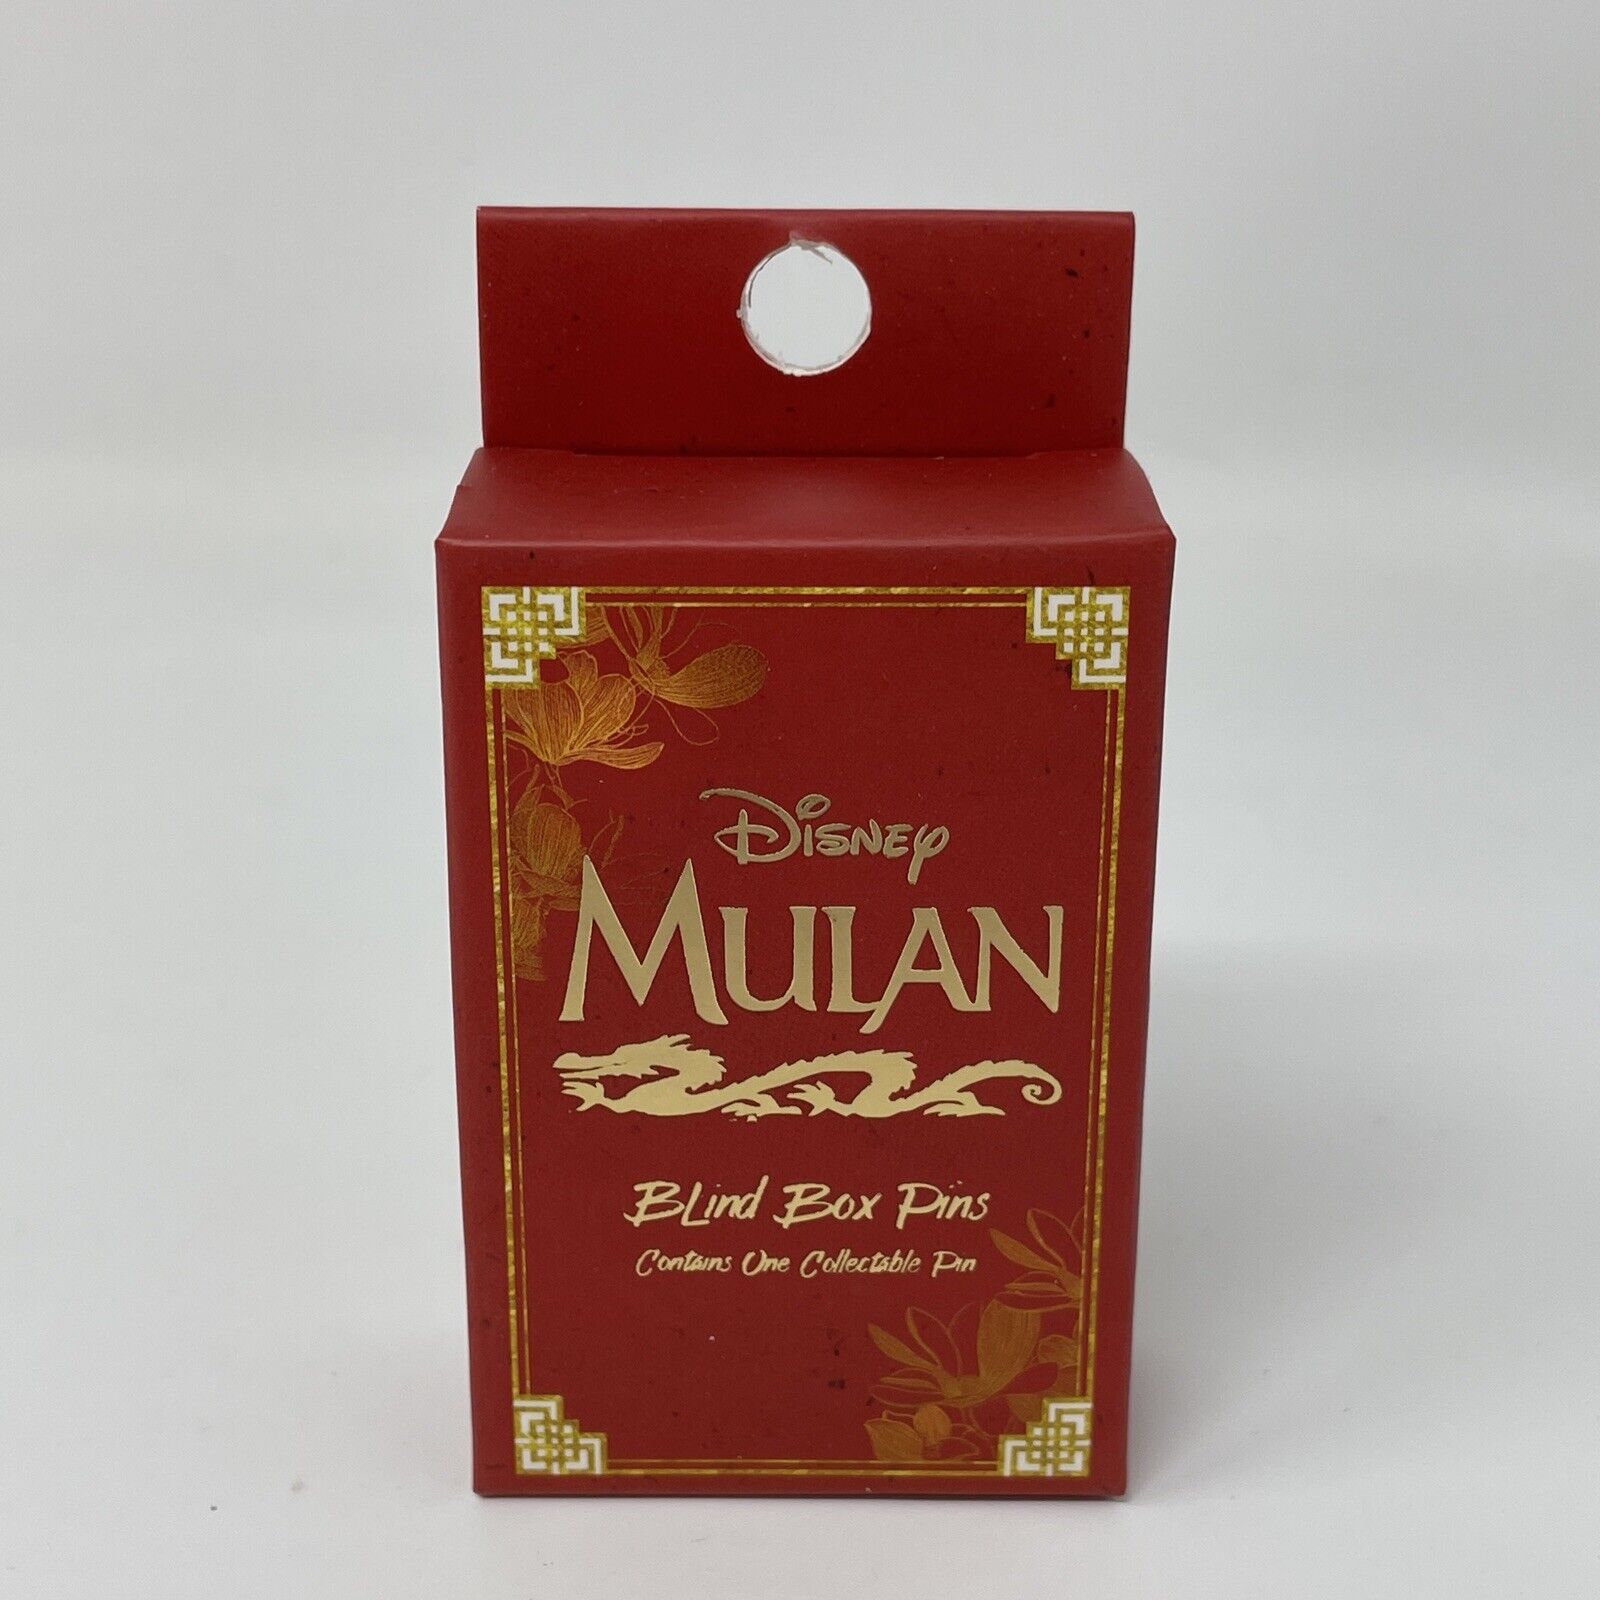 Loungefly Disney Mulan Blind Box Pins New Contains One Collectible Pin